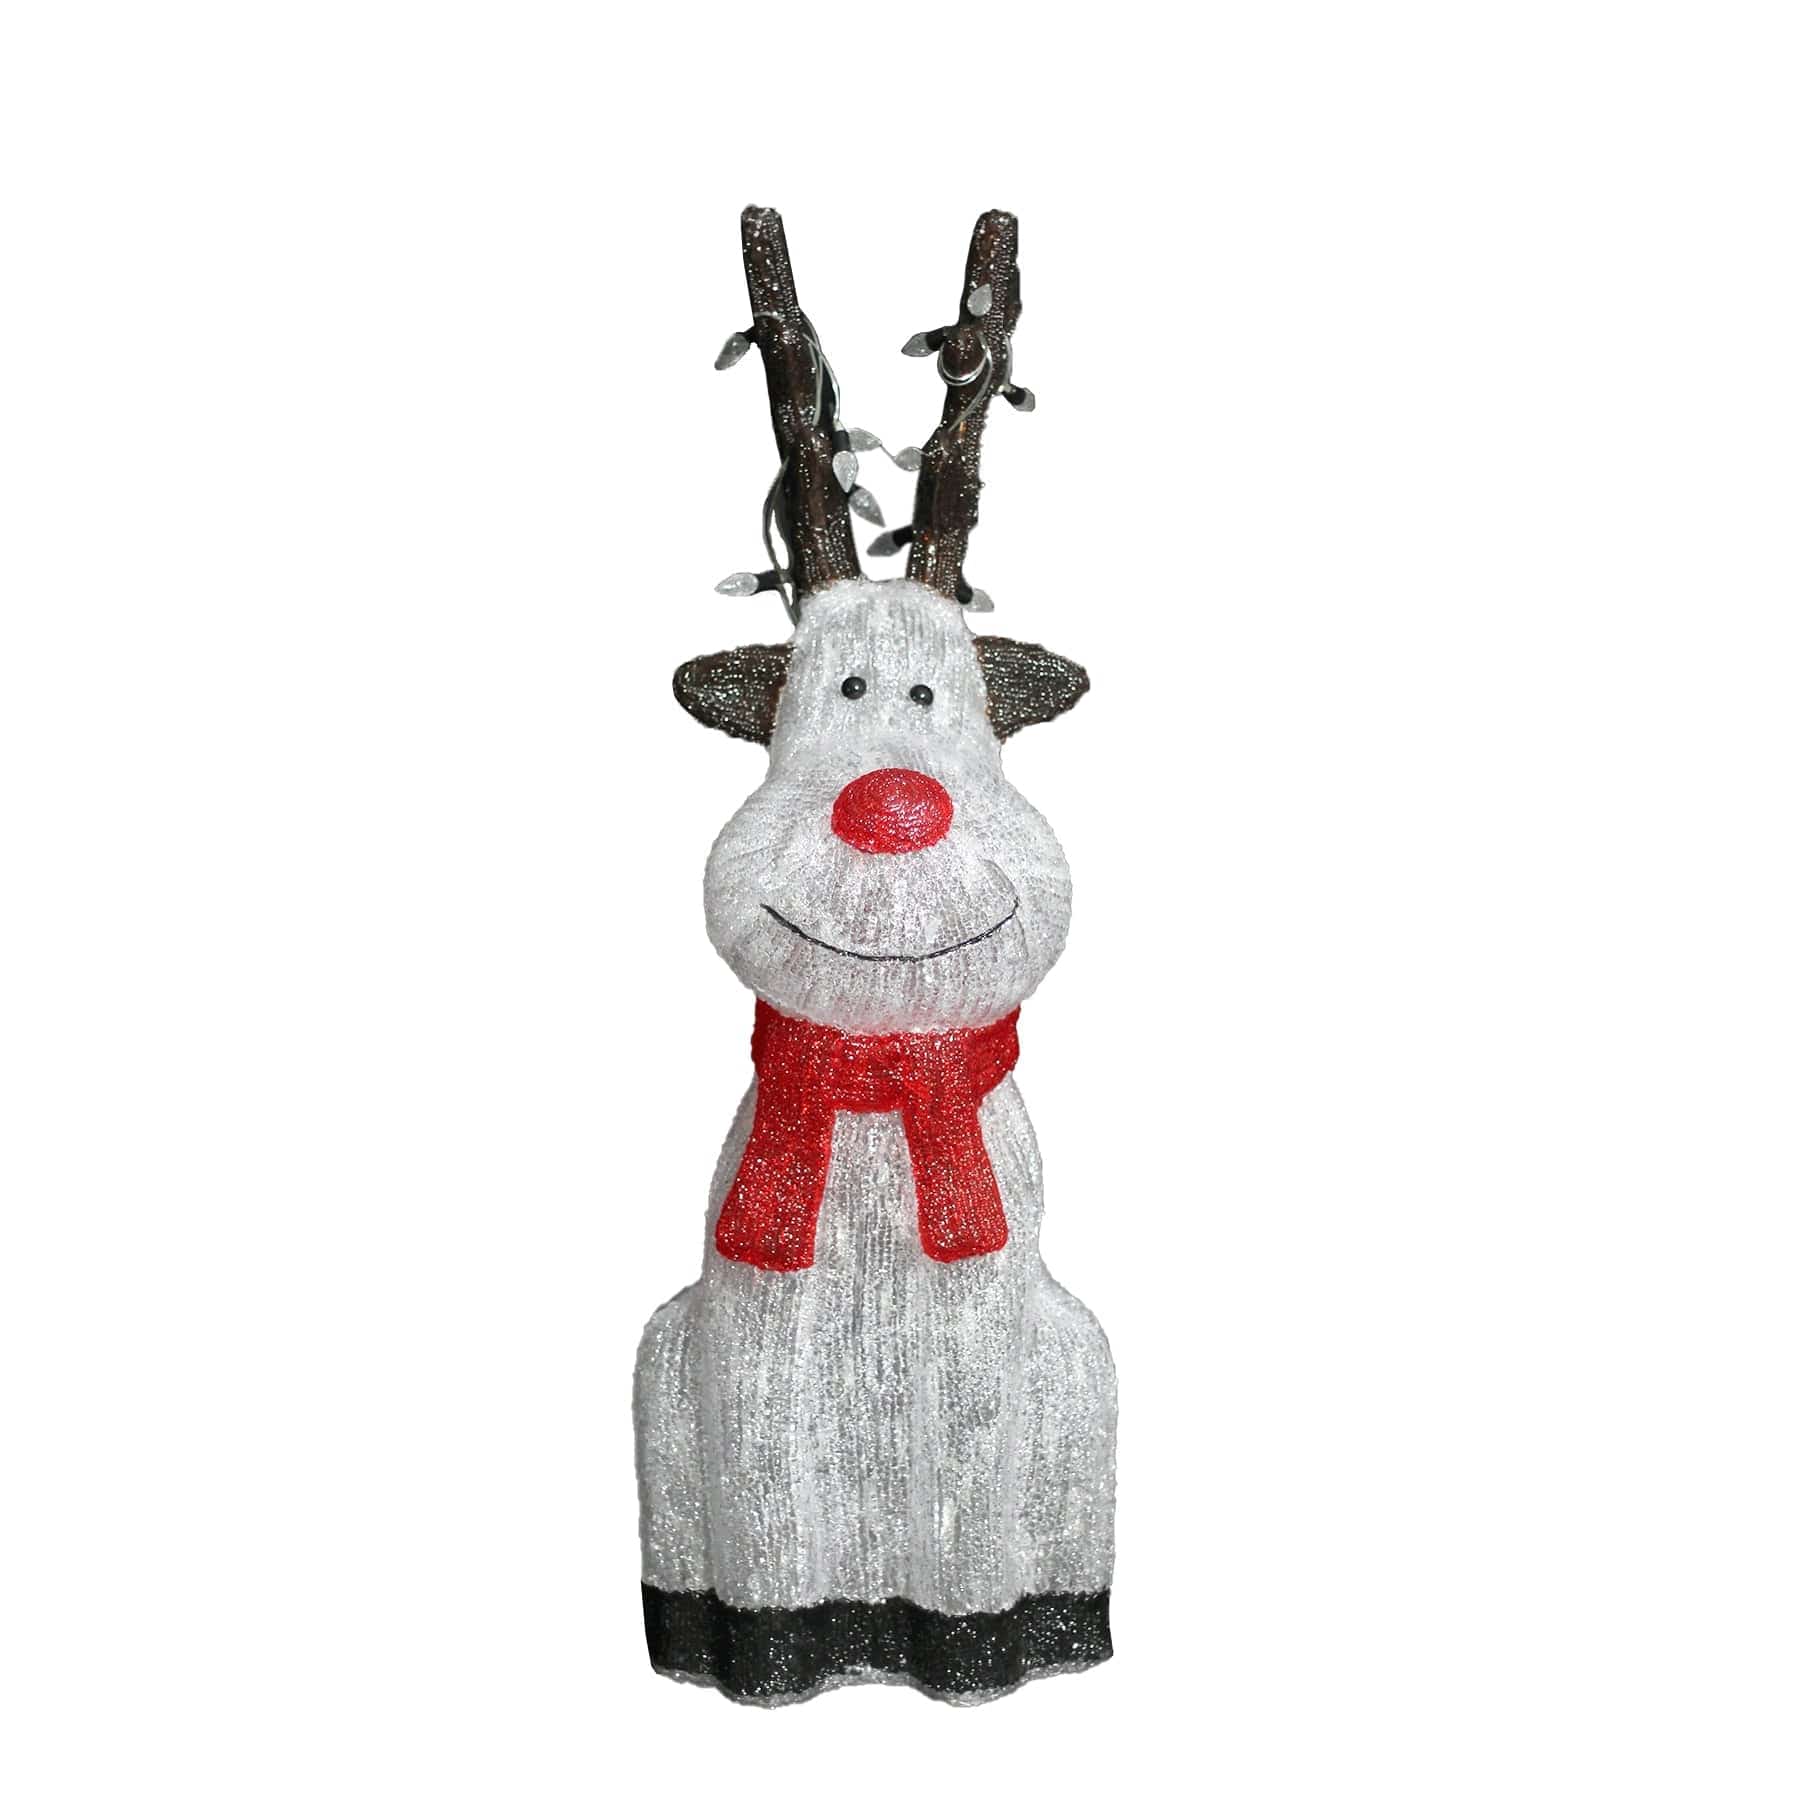 Promo Christmas Figure Acrylic Sitting Red Nose Reindeer with Christmas Lights - 2 Sizes